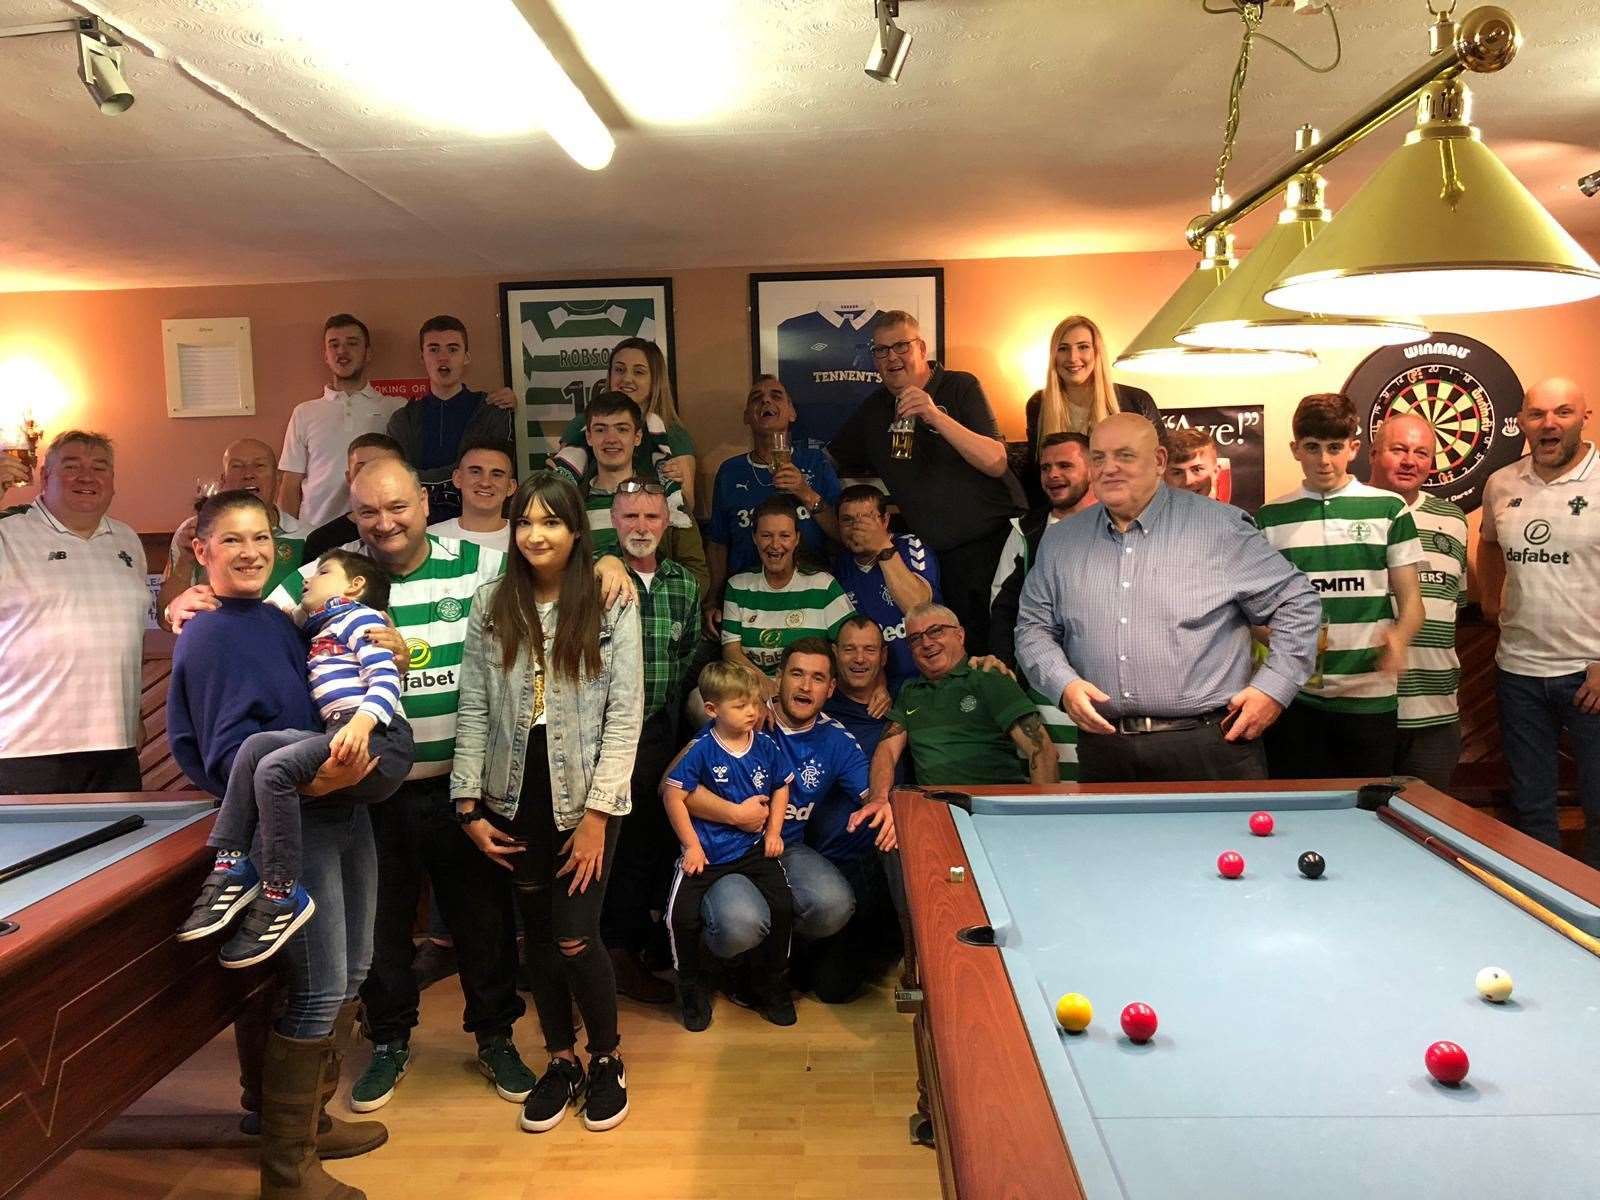 Old Firm fans rallied together for Reece.